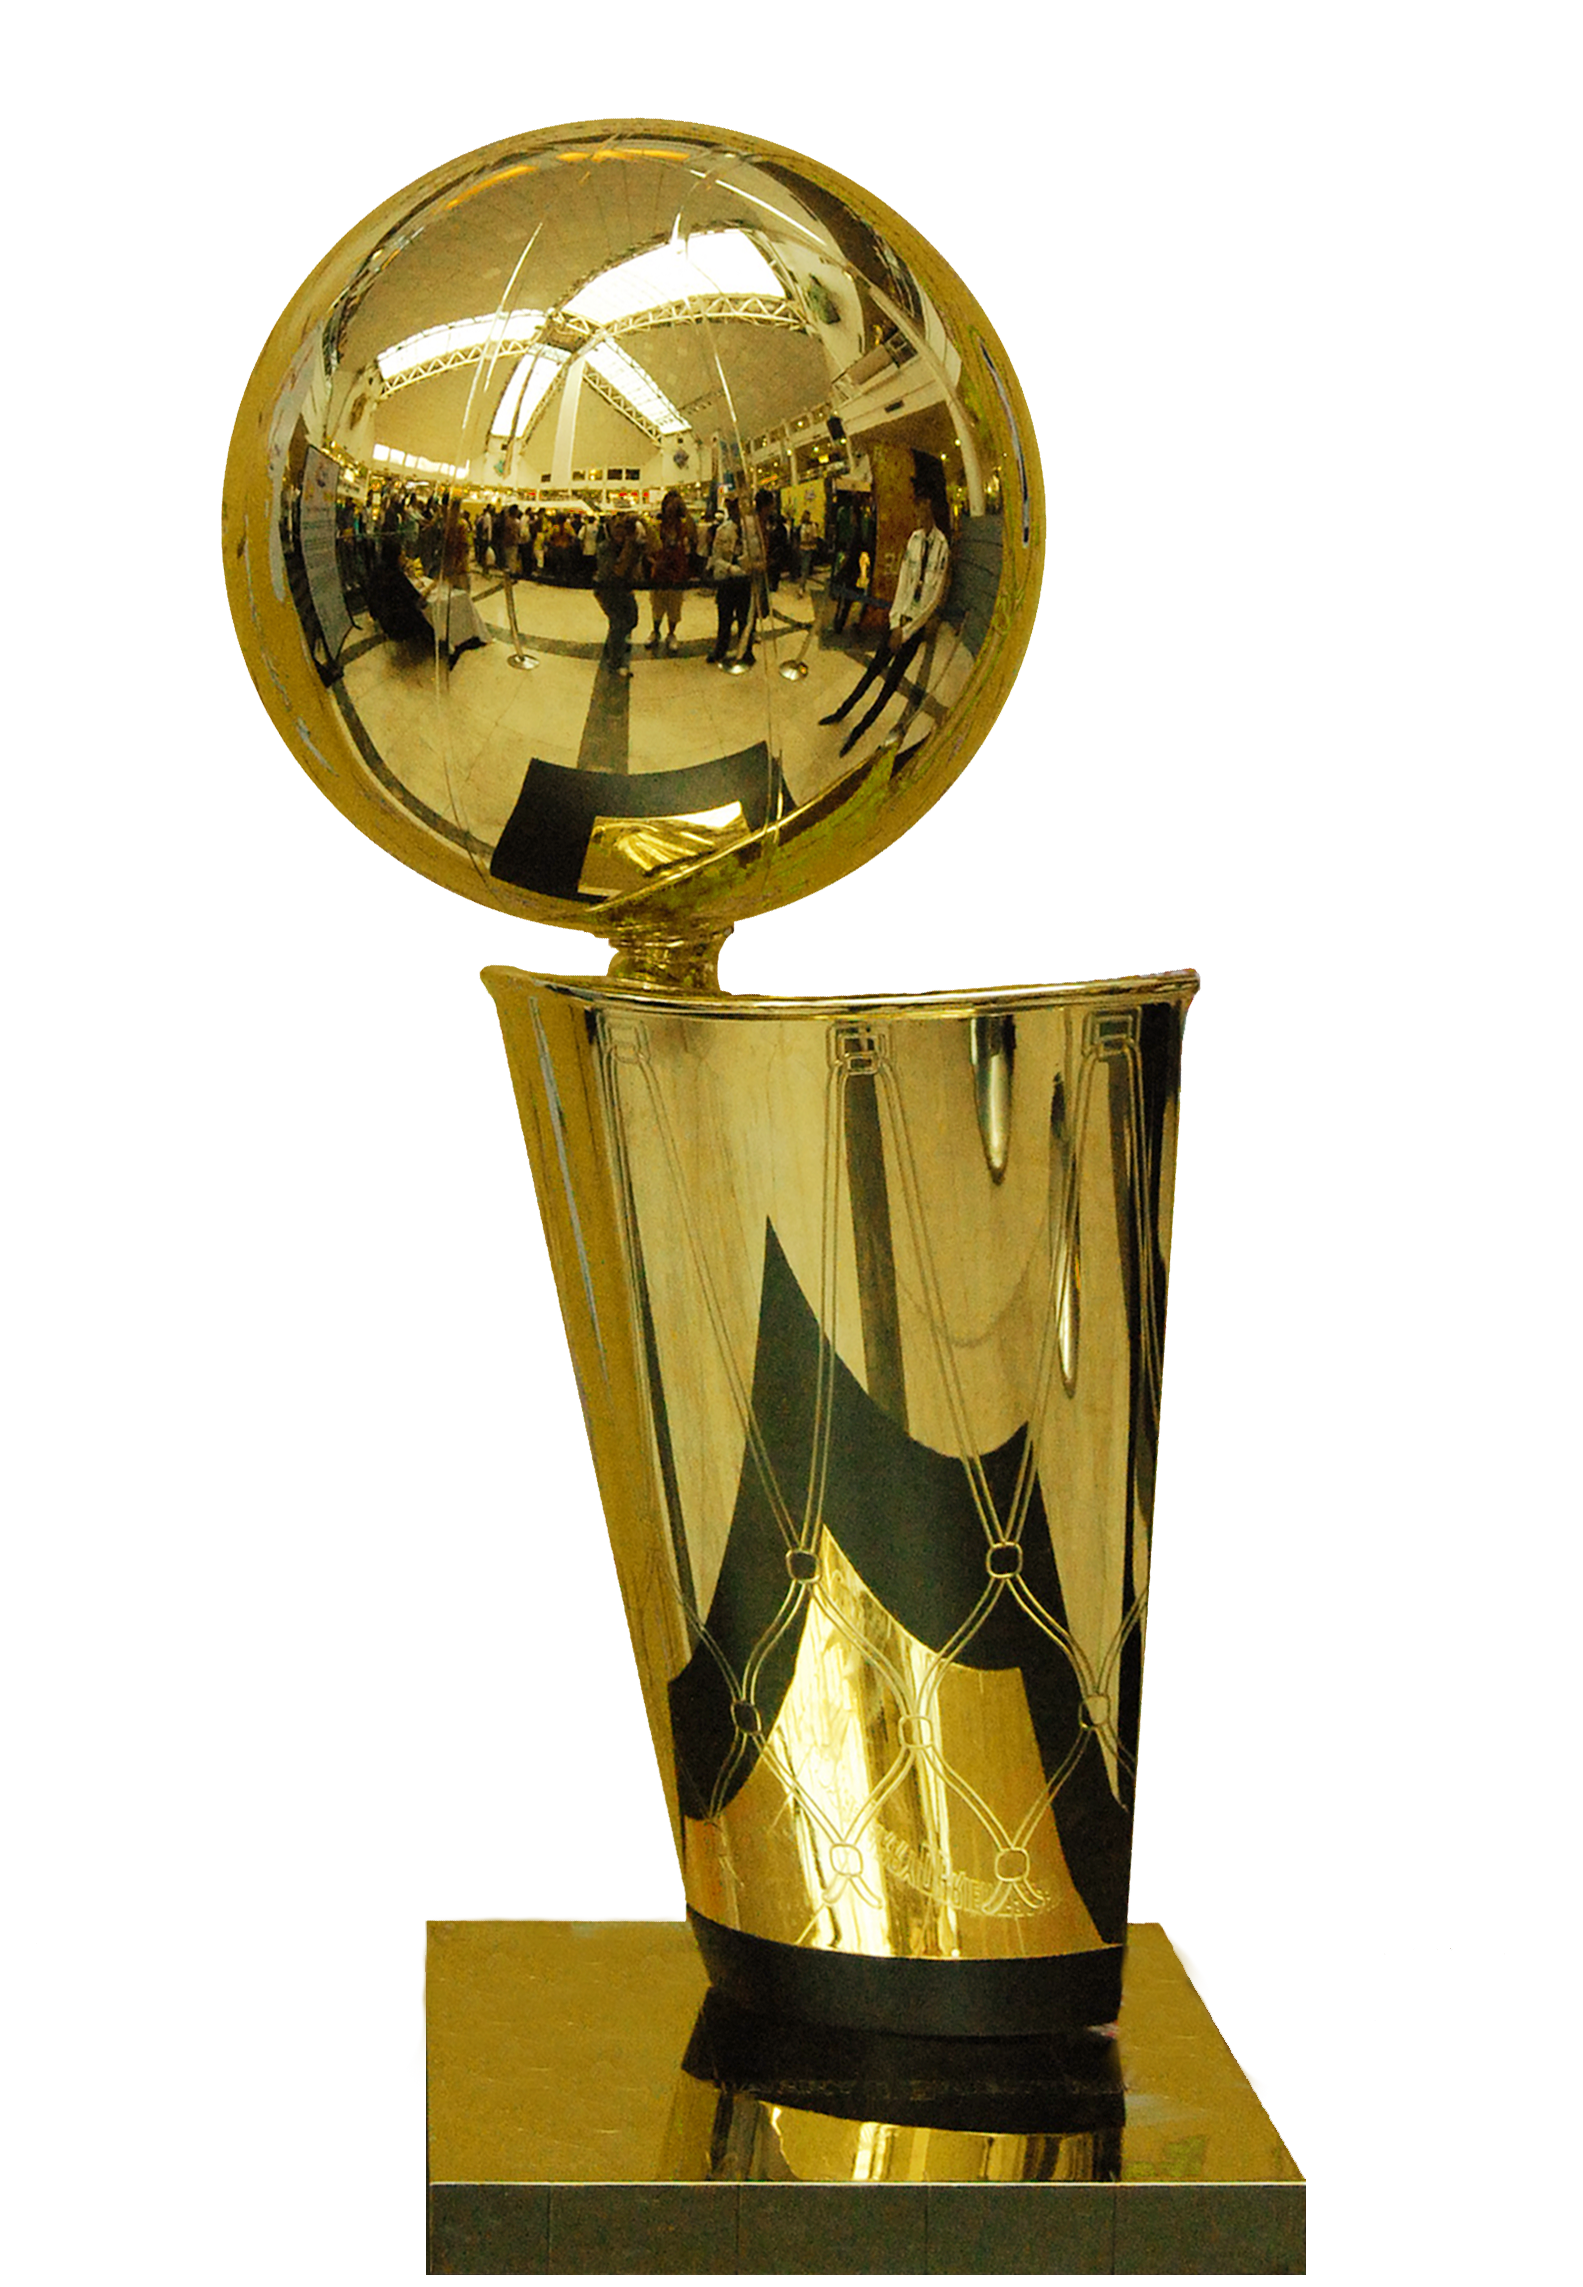 Larry O'Brien Trophy Facts: Origin, Height, Weight and More – NBC 6 South  Florida